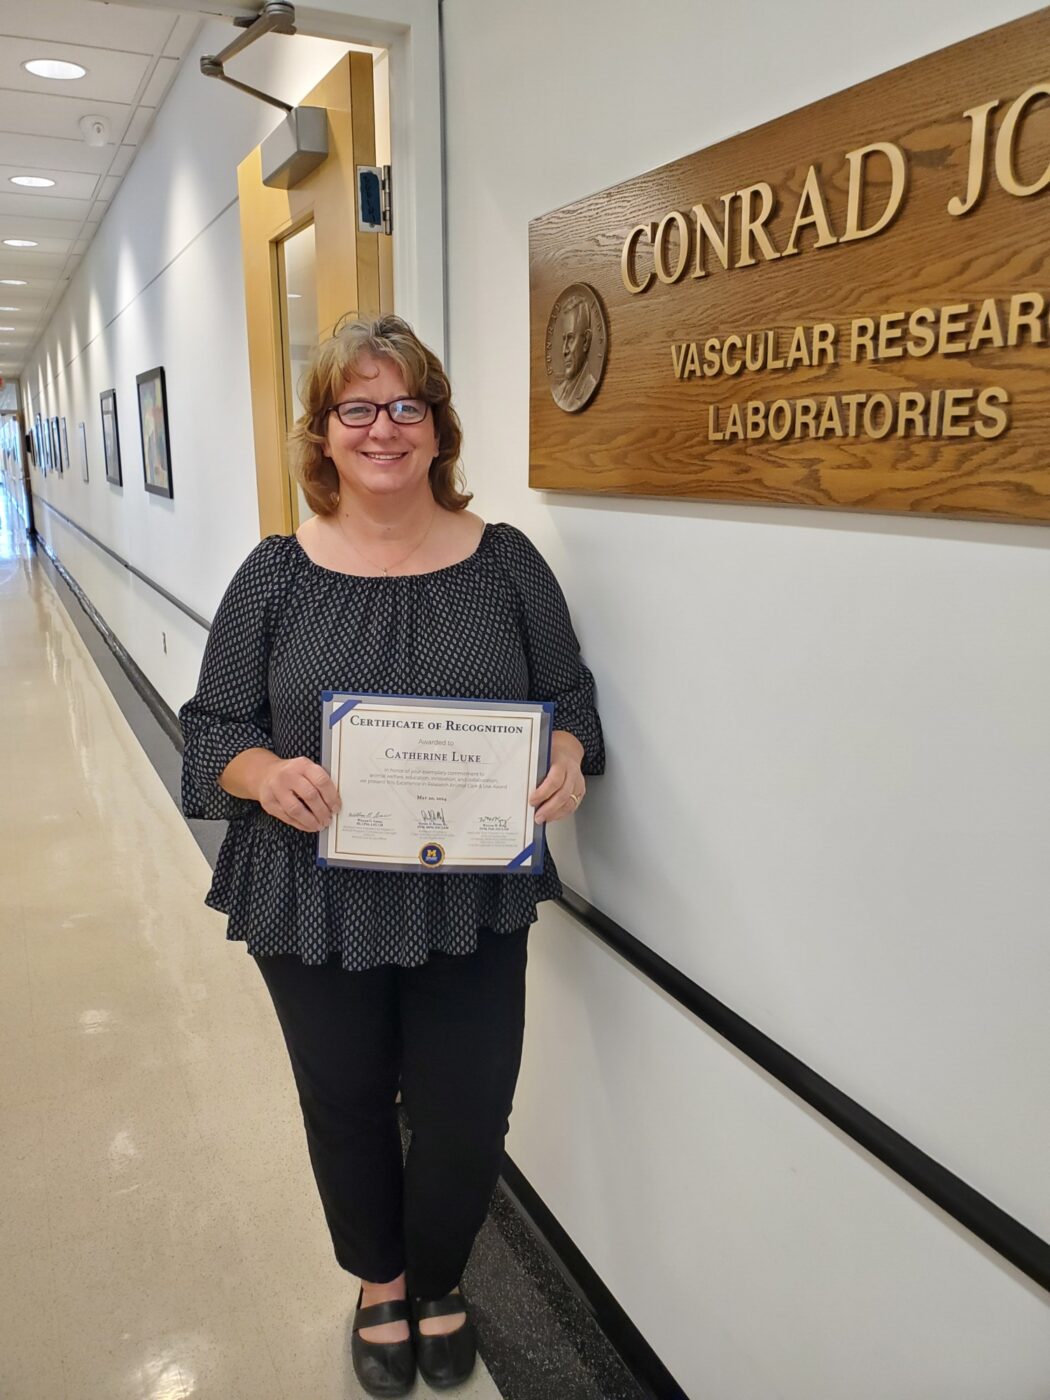 Photo of Cathy Luke, standing in front of the Conrad Jost Lab sign holding a Certificate of Recognition